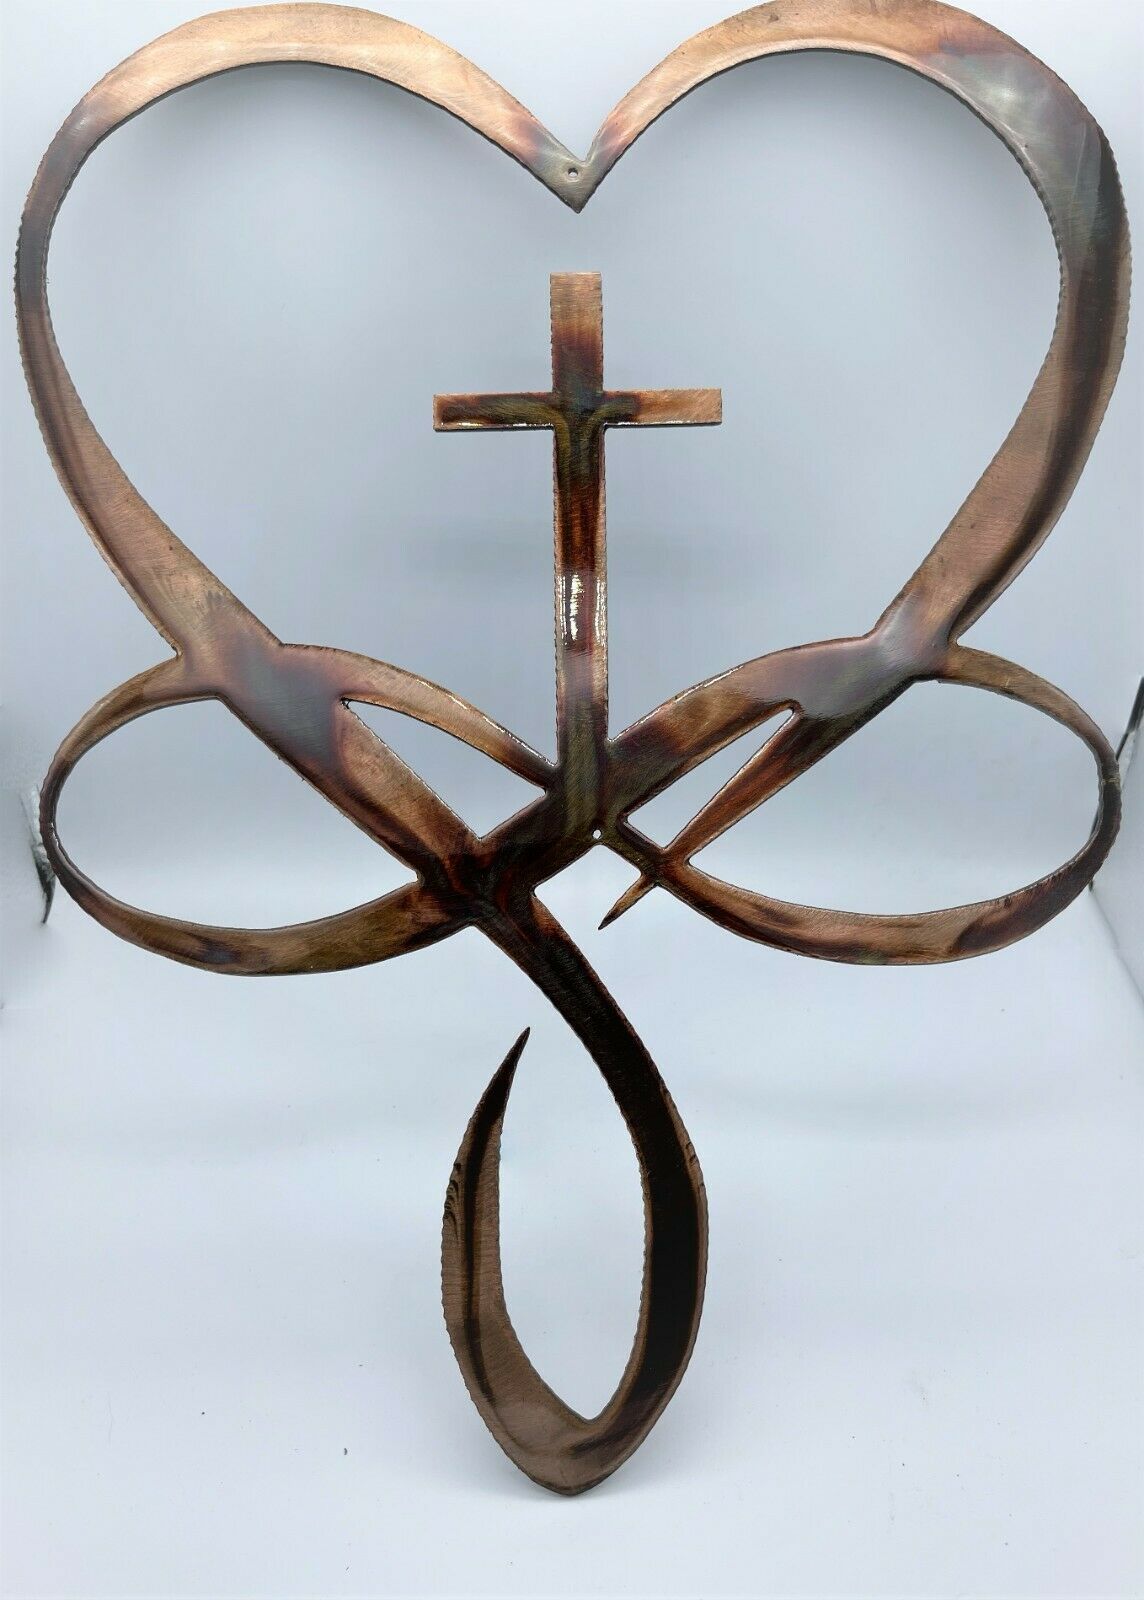 Primary image for Heart Cross Infinity Symbol Metal Wall Art 15" x 11 1/2"